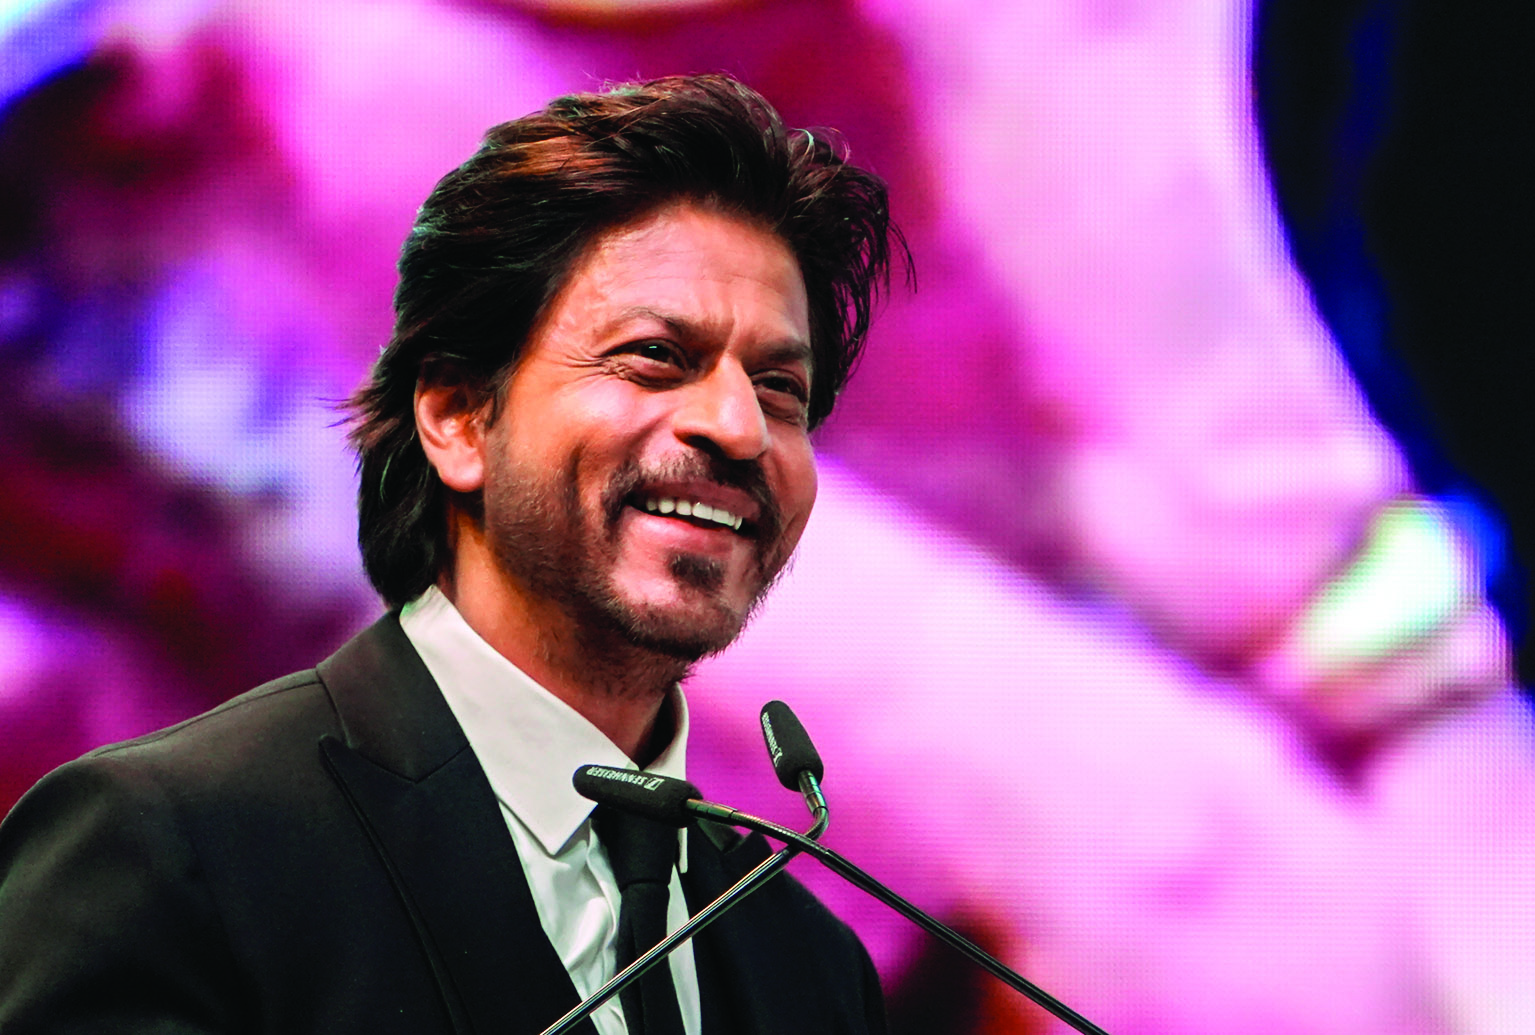 No matter what the world does, people like us will stay positive: SRK amid Pathaan protest